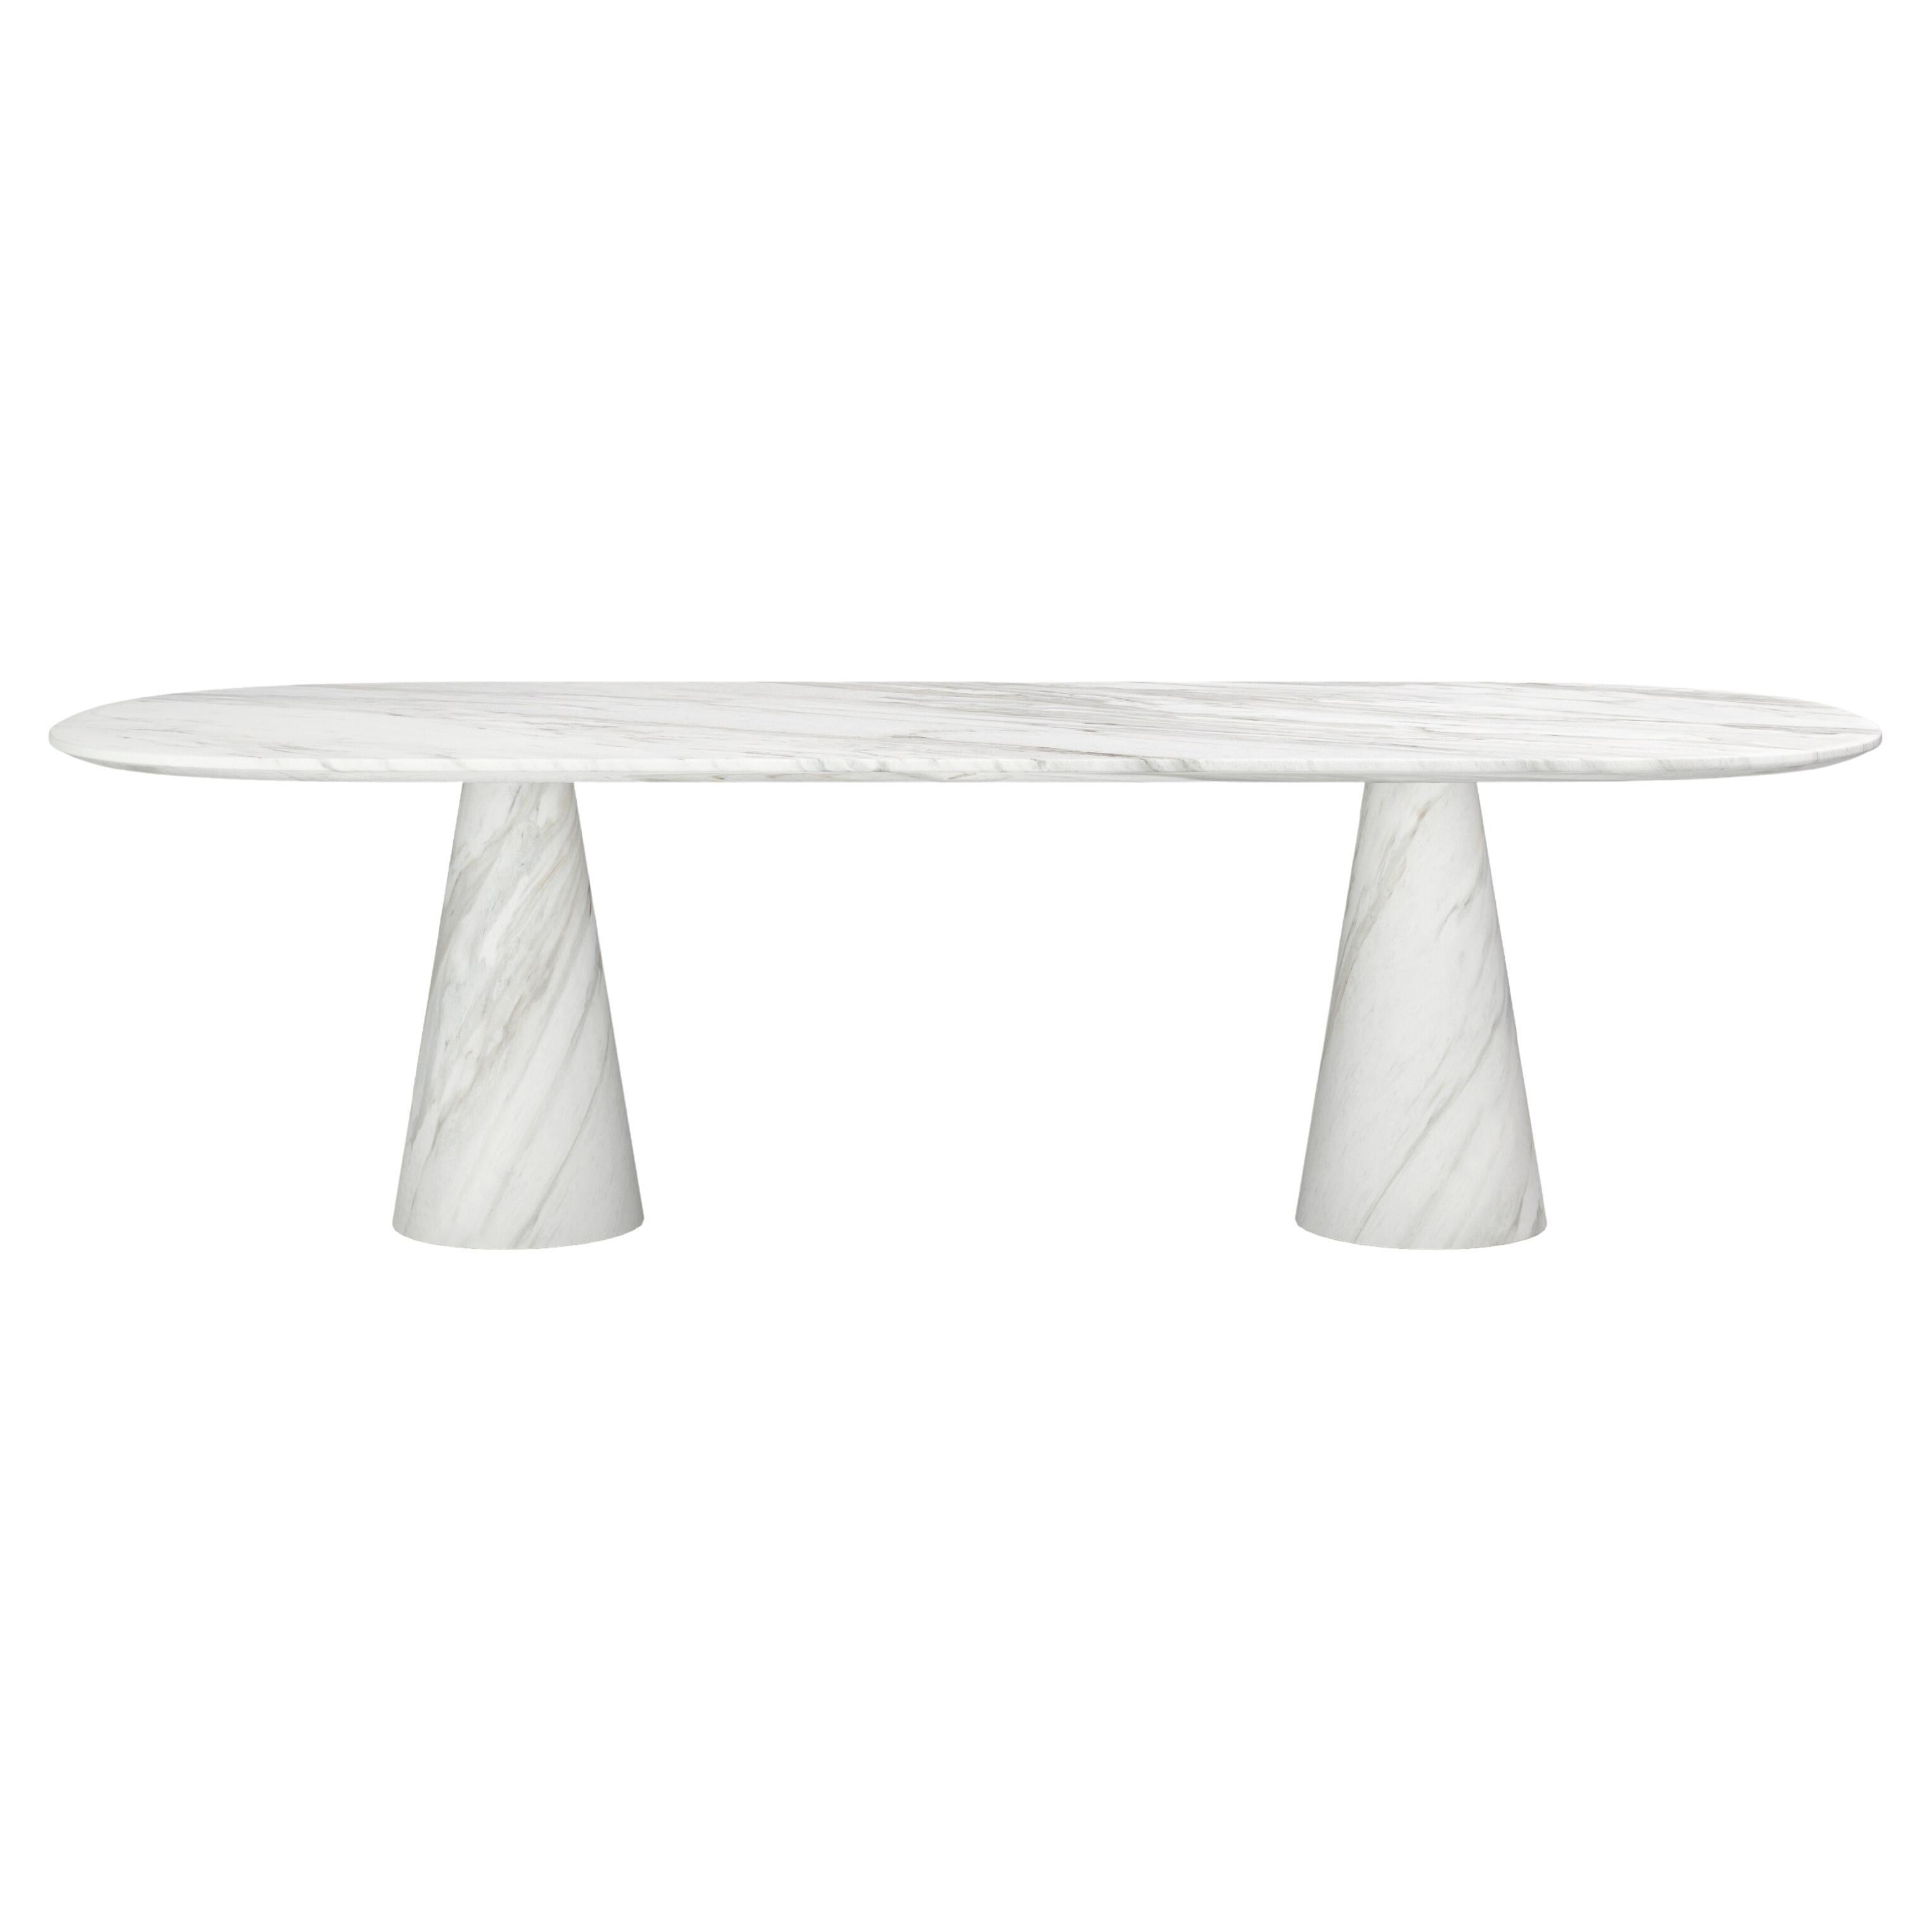 FORM(LA) Cono Oval Dining Table 96”L x 42”W x 30”H Volakas White Marble For Sale